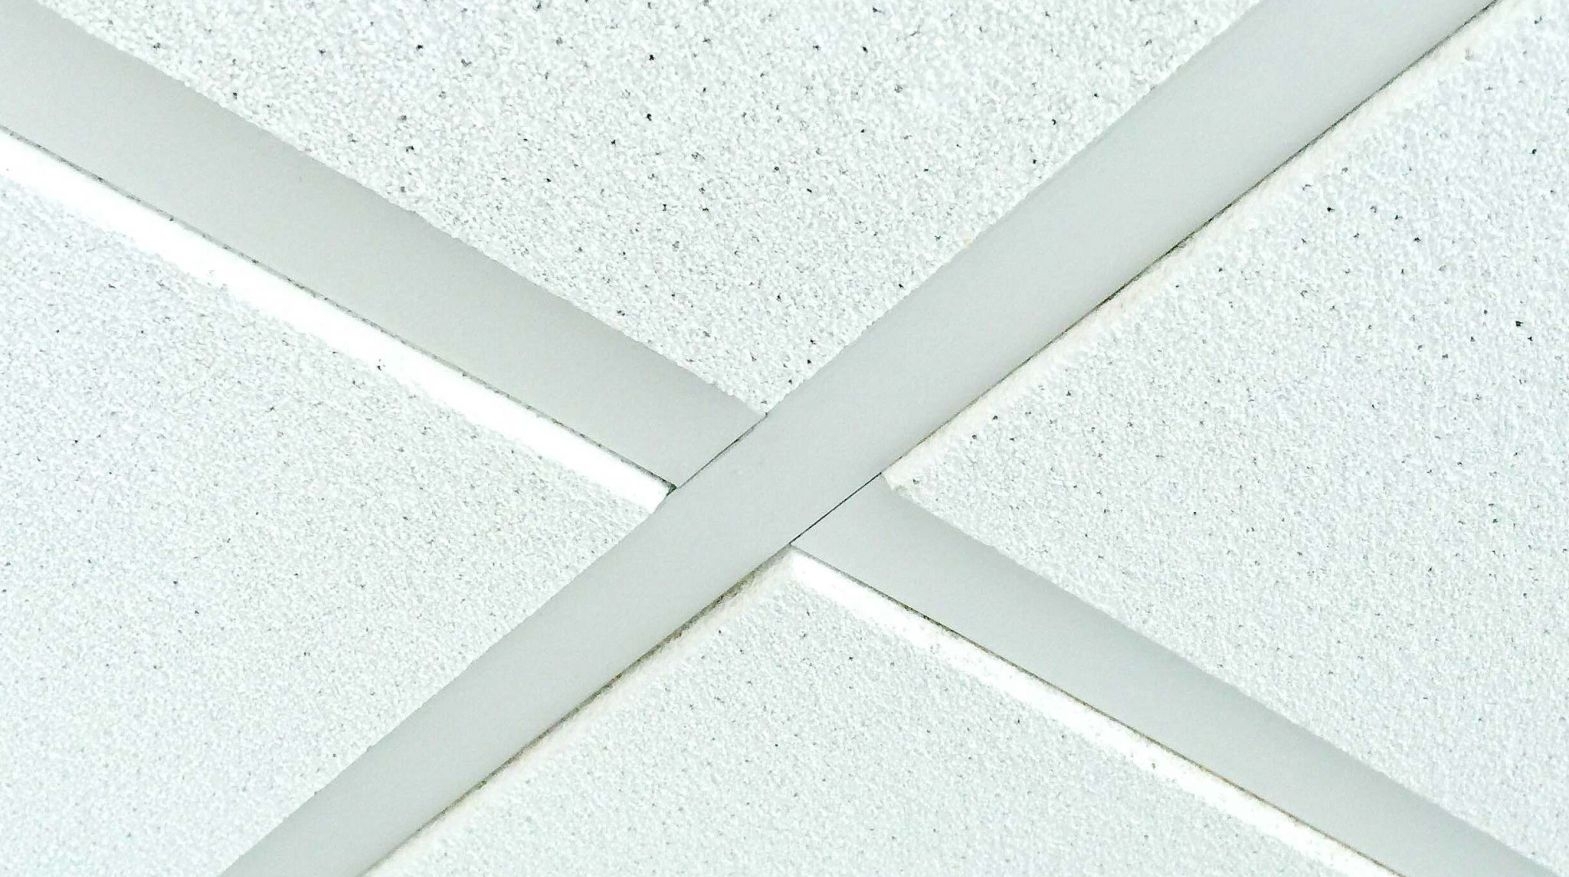 Permalink to Armstrong Cortega Ceiling Tiles Second Look